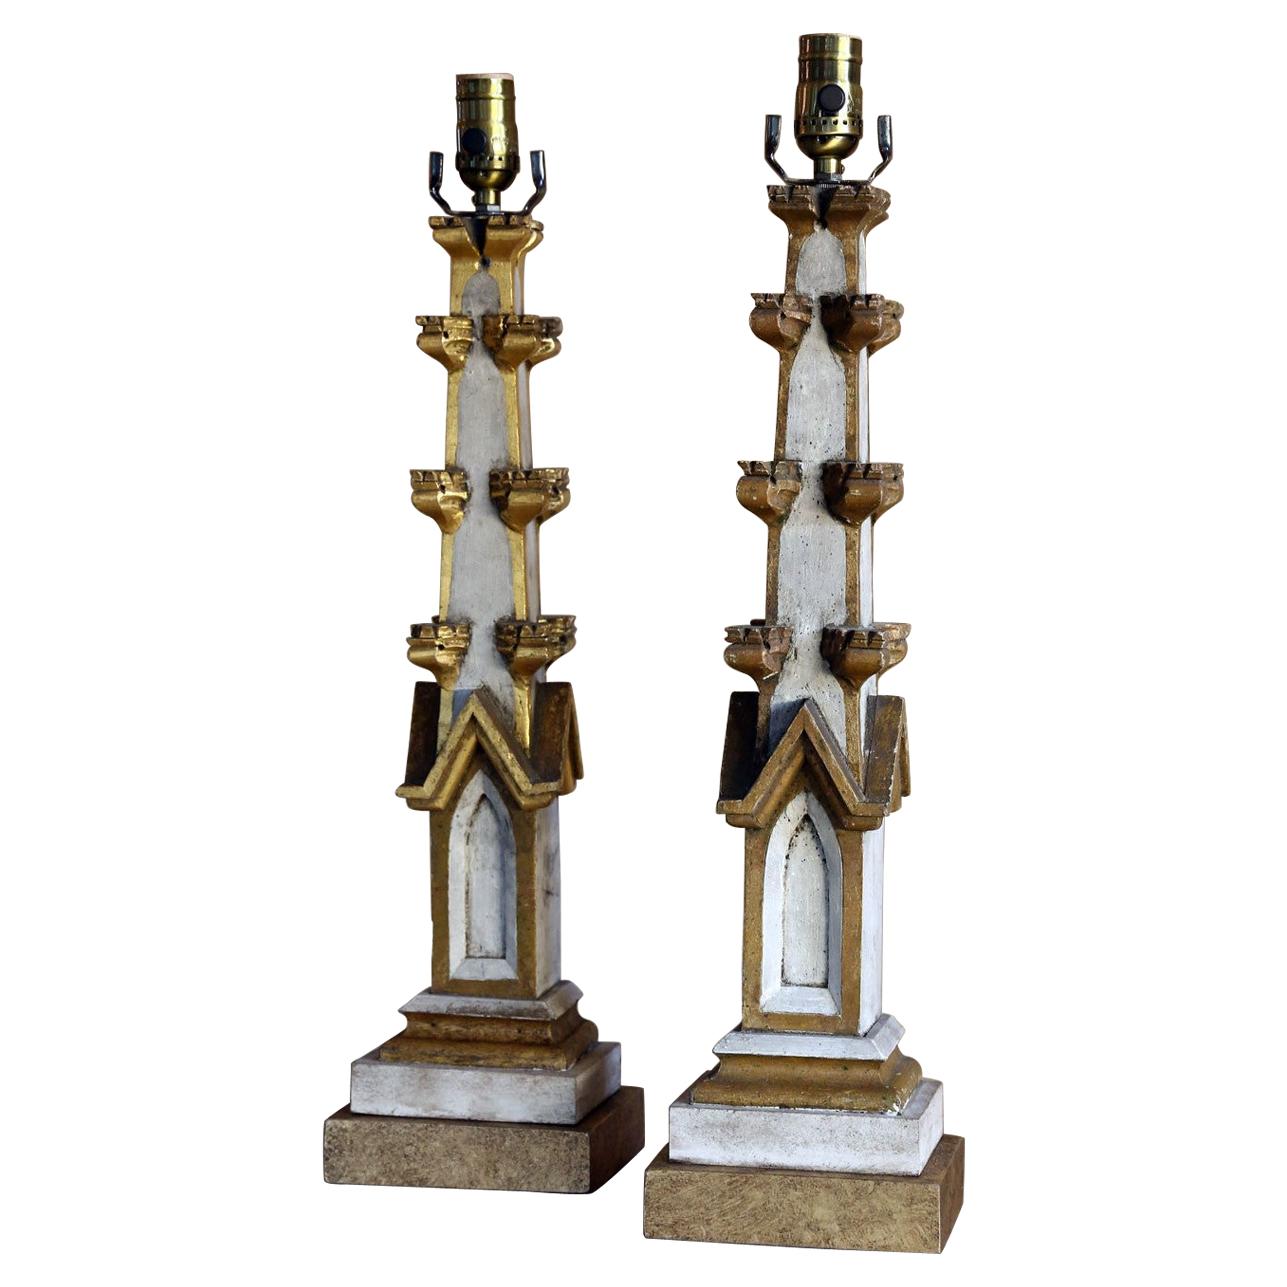 Table Lamps Made from Antique Painted Fragments with a Gothic Revival Feel